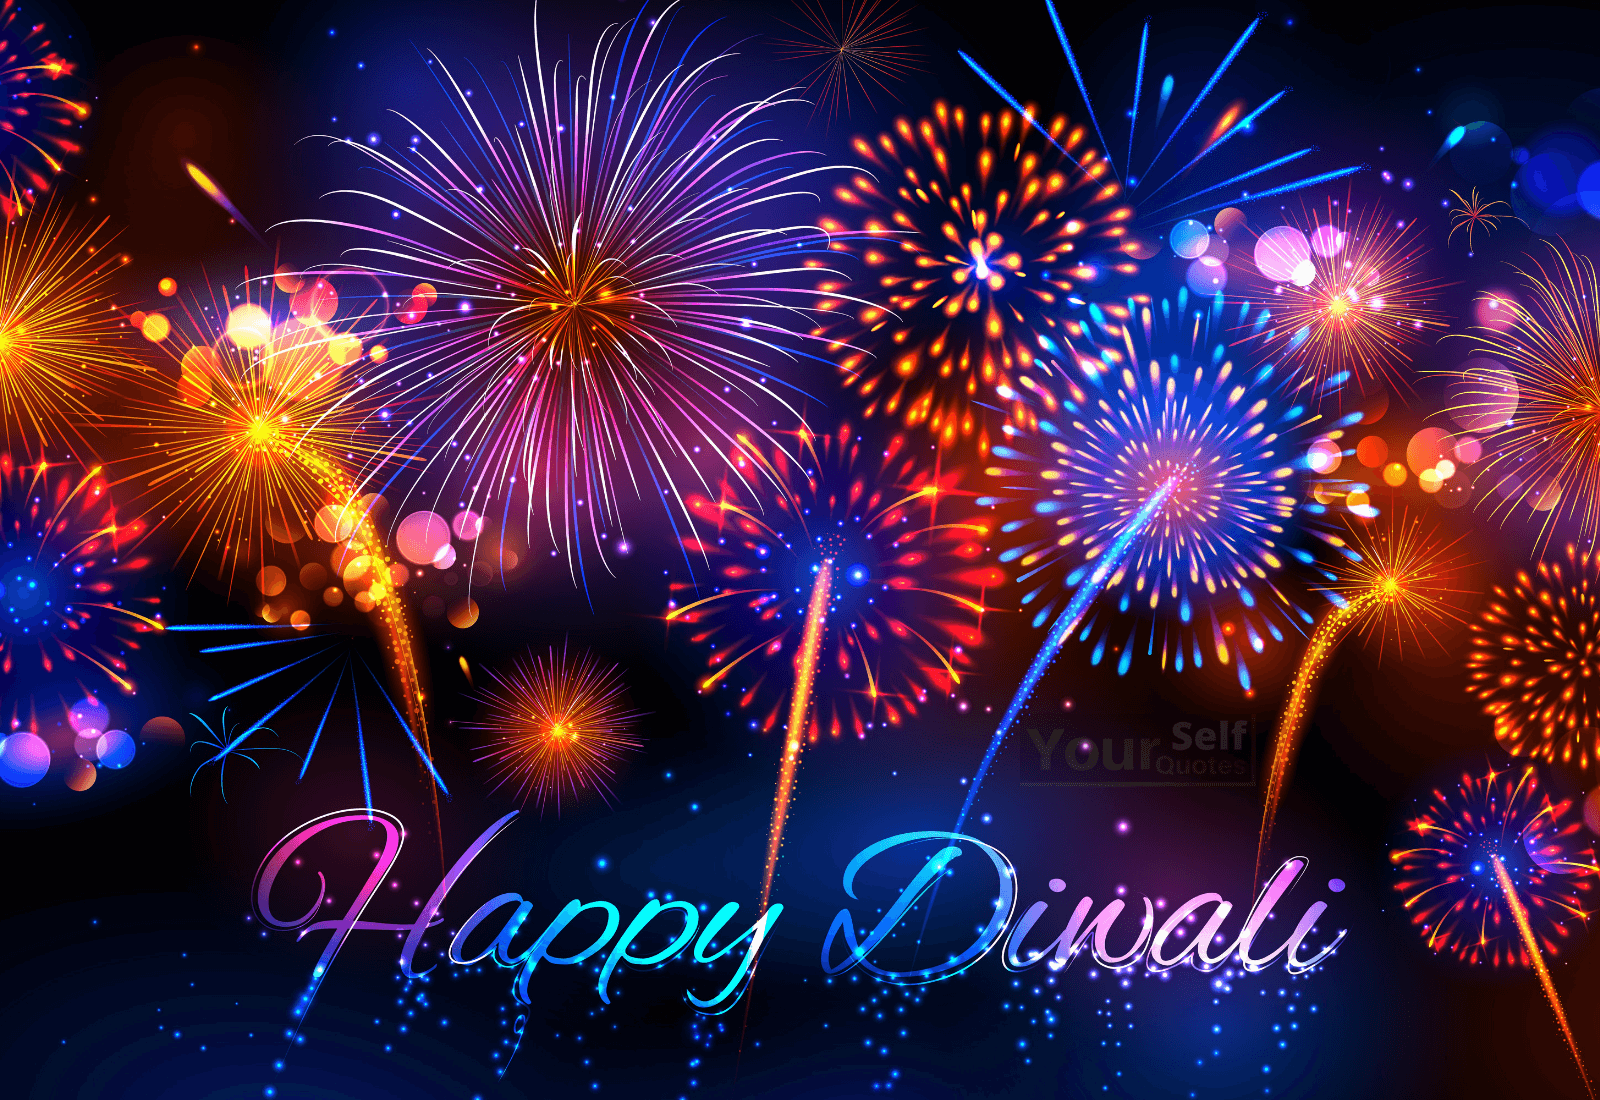 2022 Happy Diwali Image, Photo, Picture, Wallpaper for WhatsApp